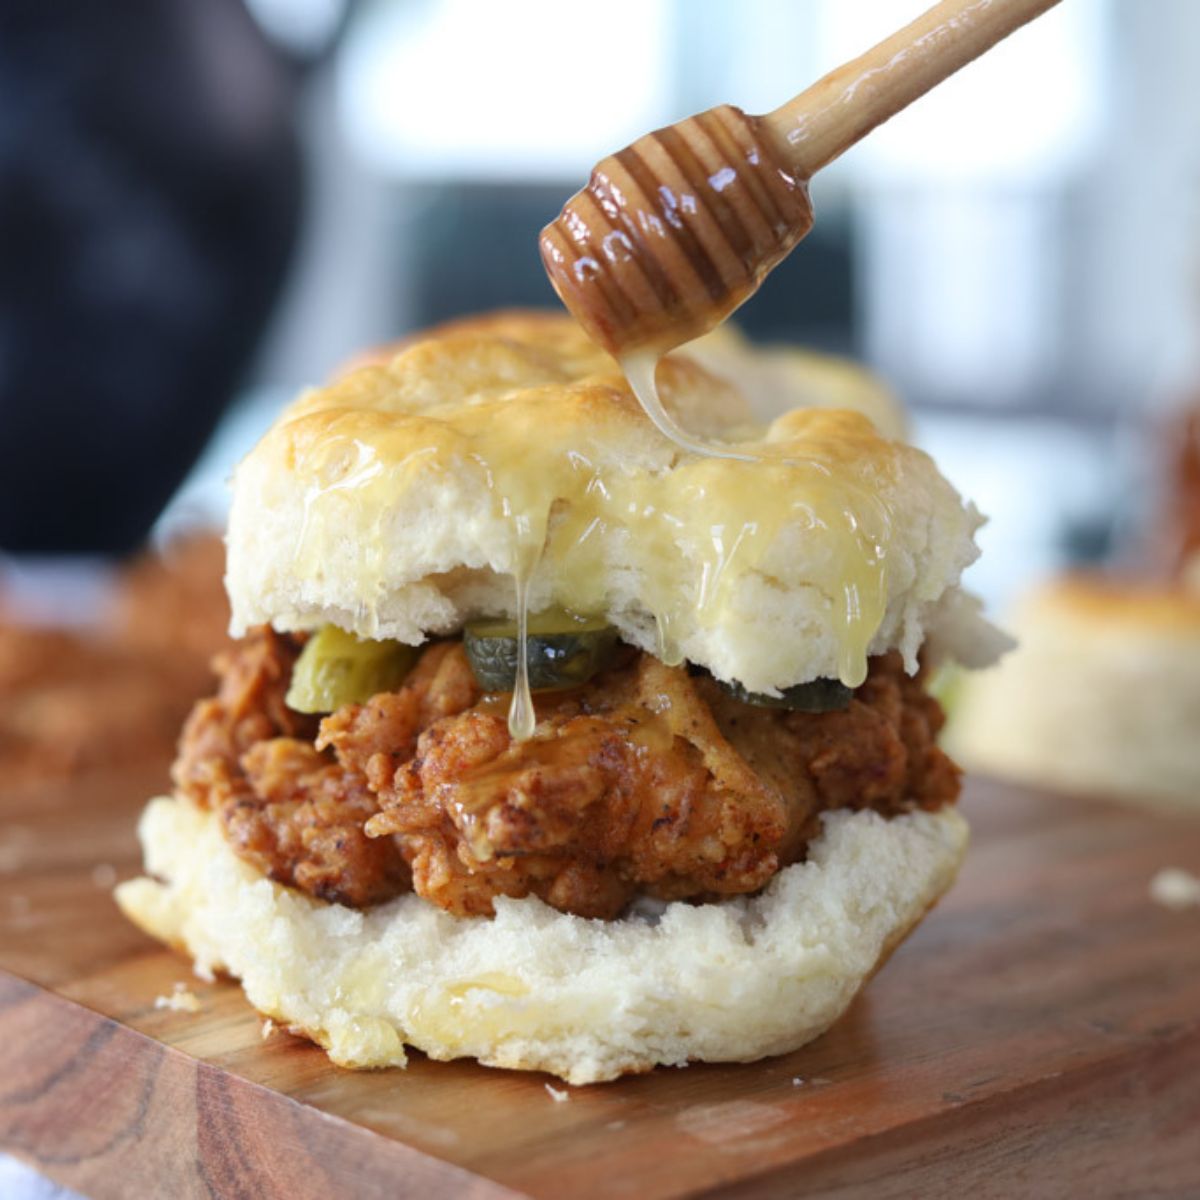 Honey butter chicken biscuit being shown on a wooden cutting board with a honeycomb utensil drizzling sauce over the top.